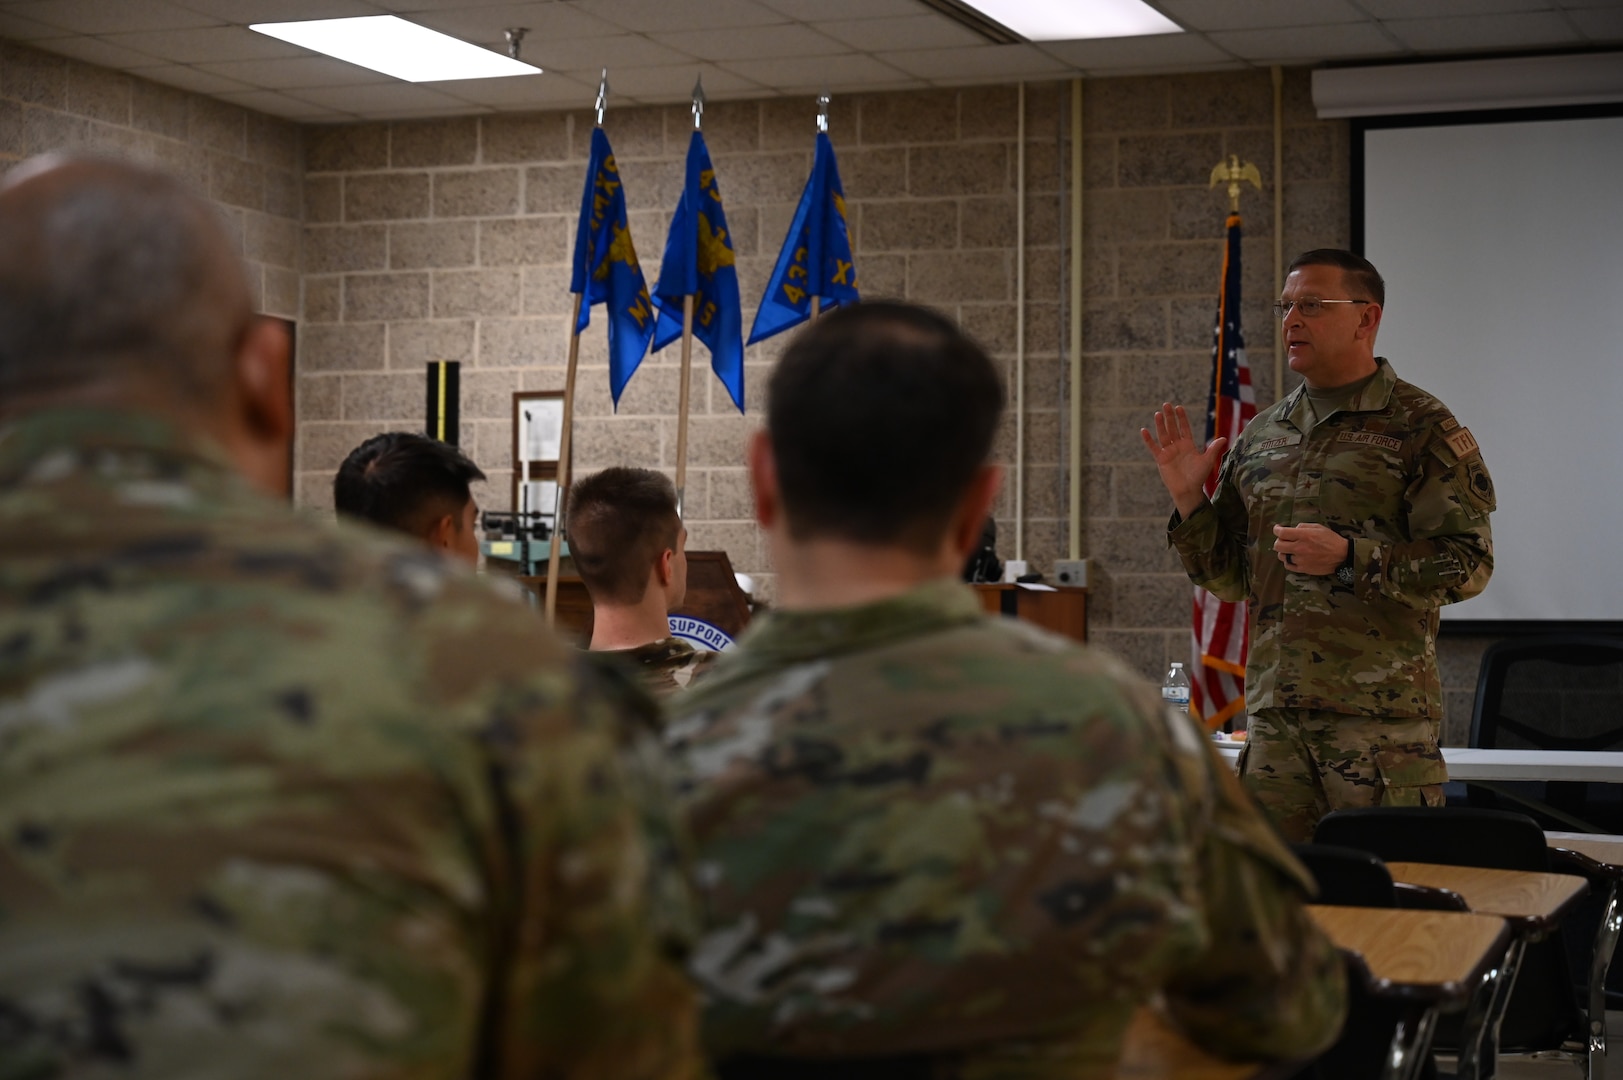 Brig. Gen. Max Stitzer, mobilization assistant to Headquarters Air Force Director of Staff, speaks to several airmen and their supervisors from the 433rd Maintenance Group during his visit to the 433rd Airlift Wing at Joint Base San Antonio-Lackland, Texas, March 5, 2023.